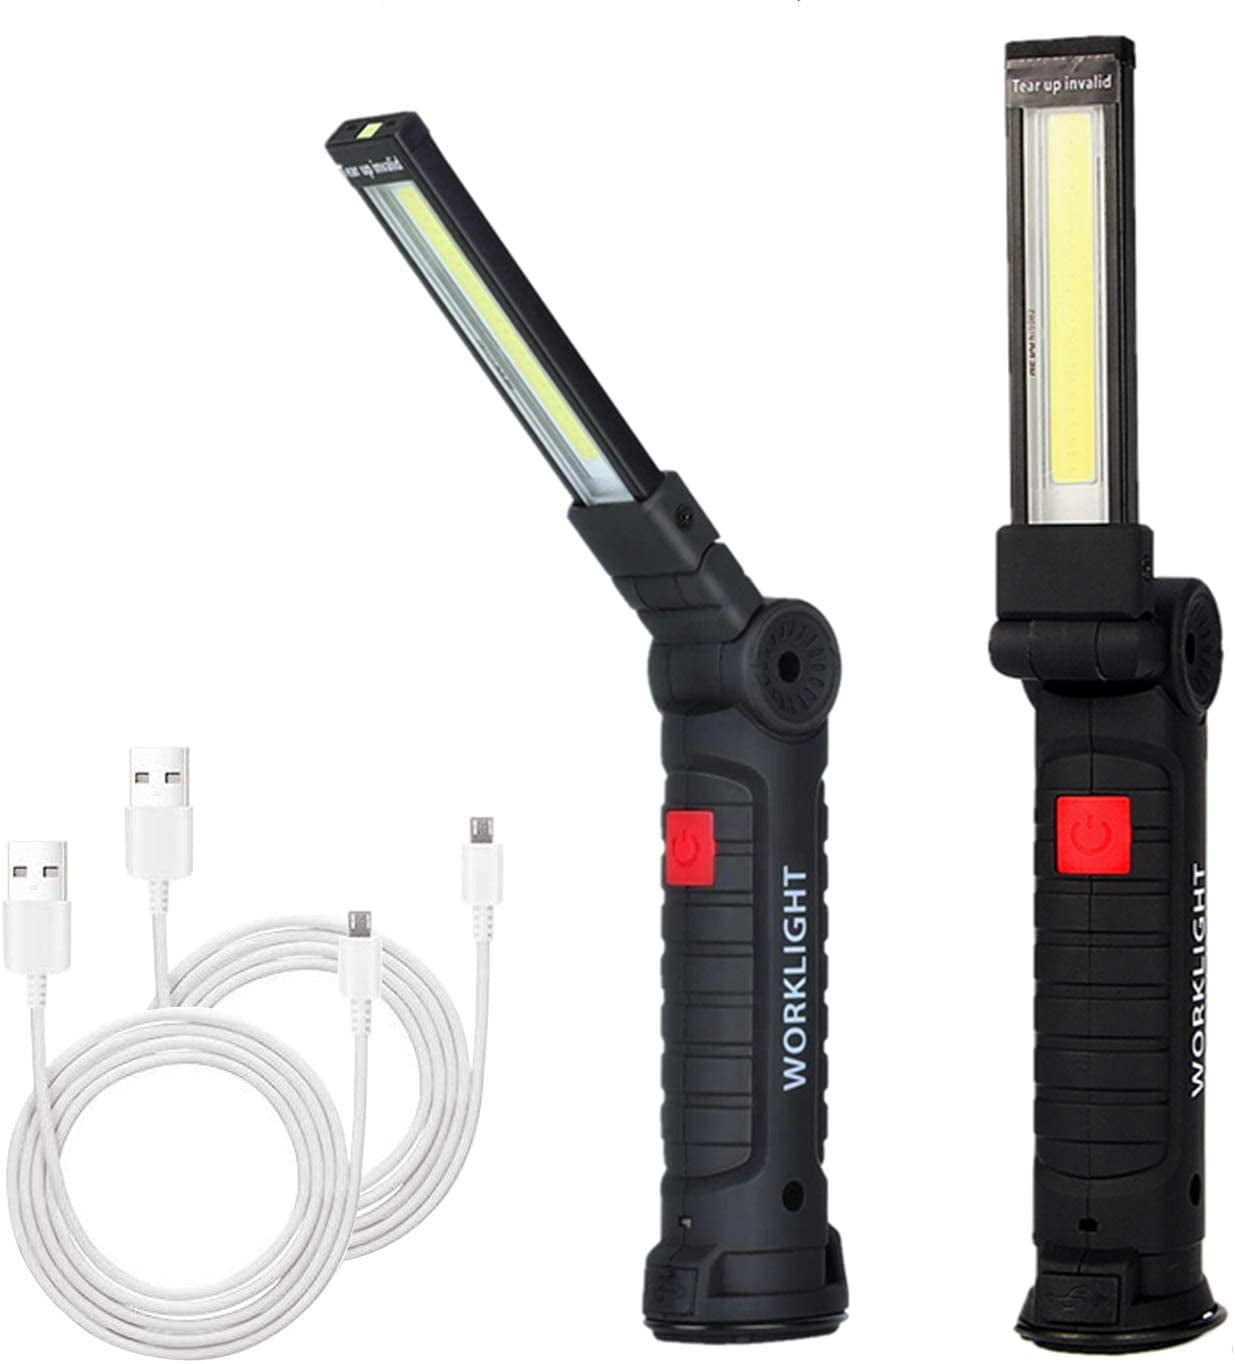 4Pack Rechargeable COB 40-LED Work Light Lamp Flashlight Inspect Hand Torch USA 